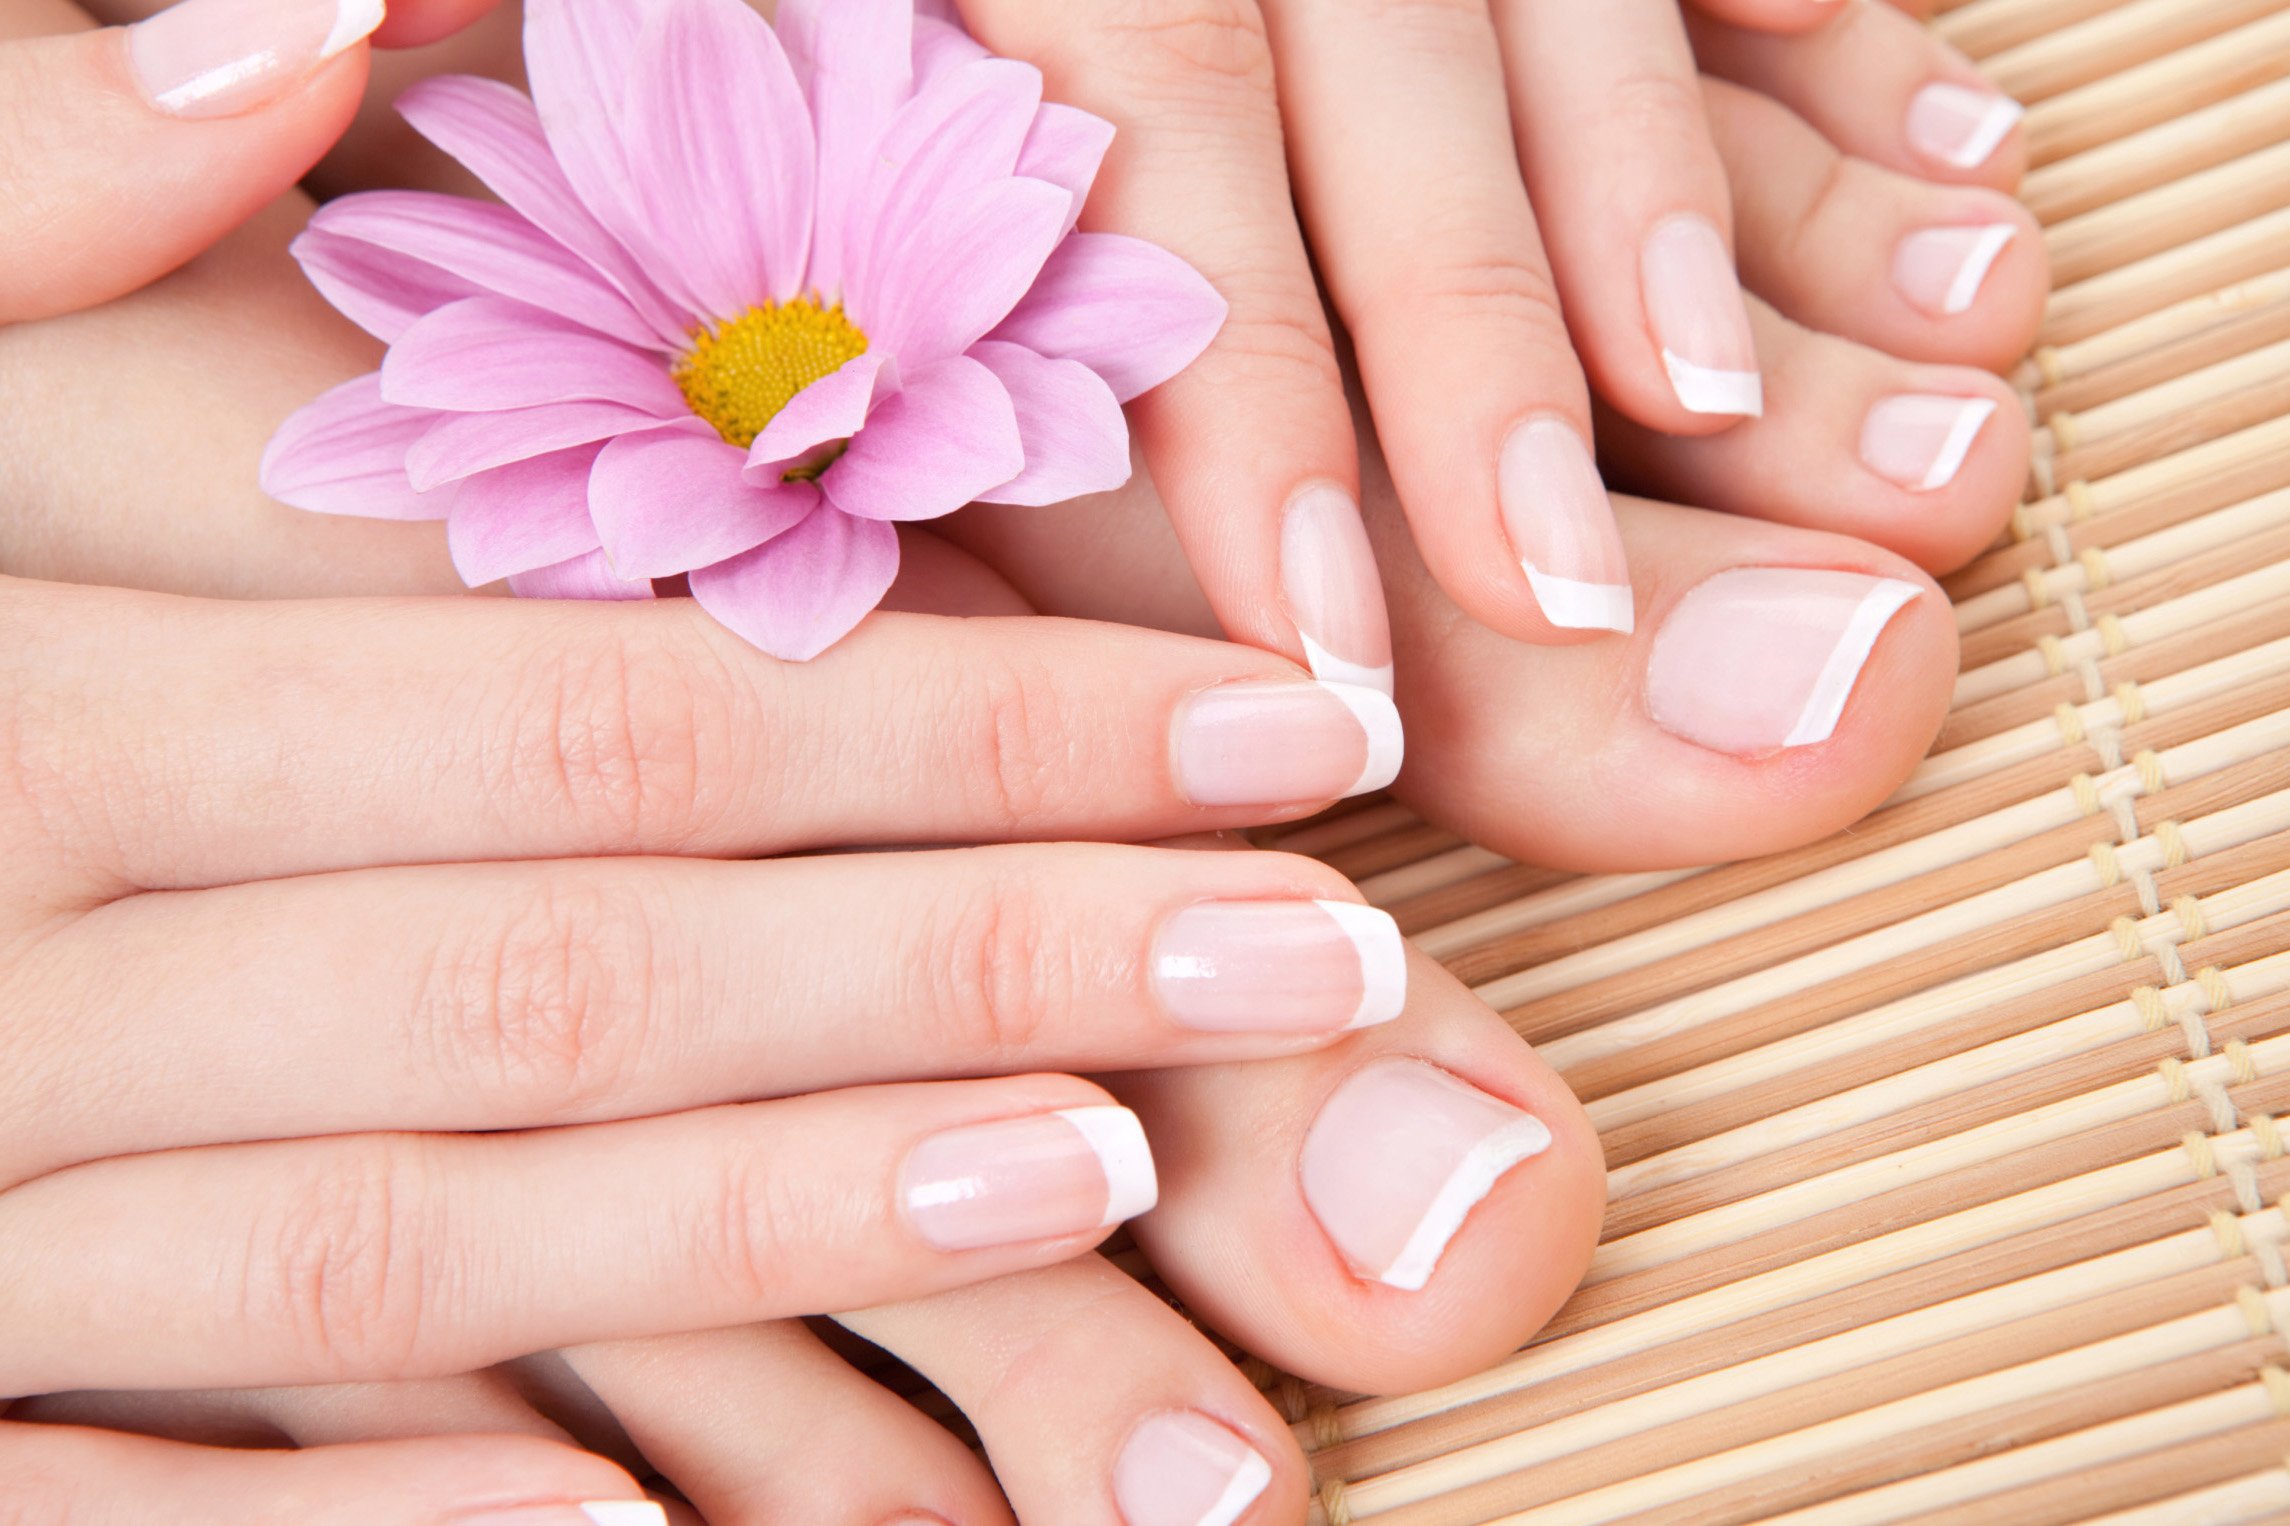 Fingernails grow approximately 3 millimeters per month which is twice as fast as toenails